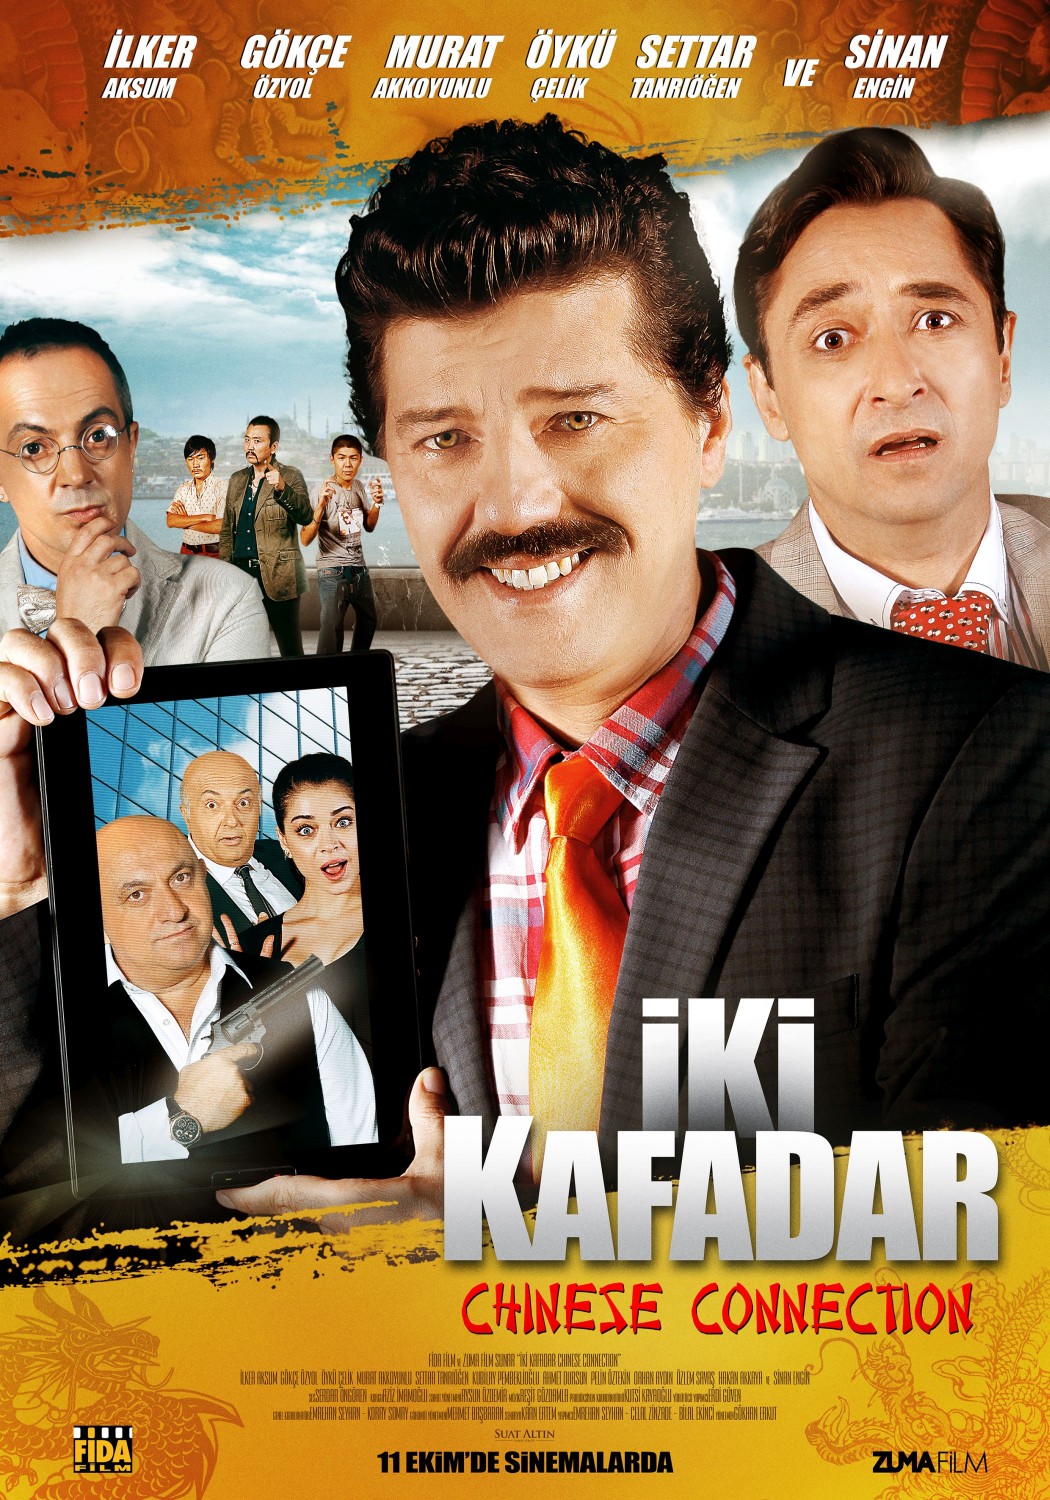 Extra Large Movie Poster Image for Iki kafadar Chinese Connection 